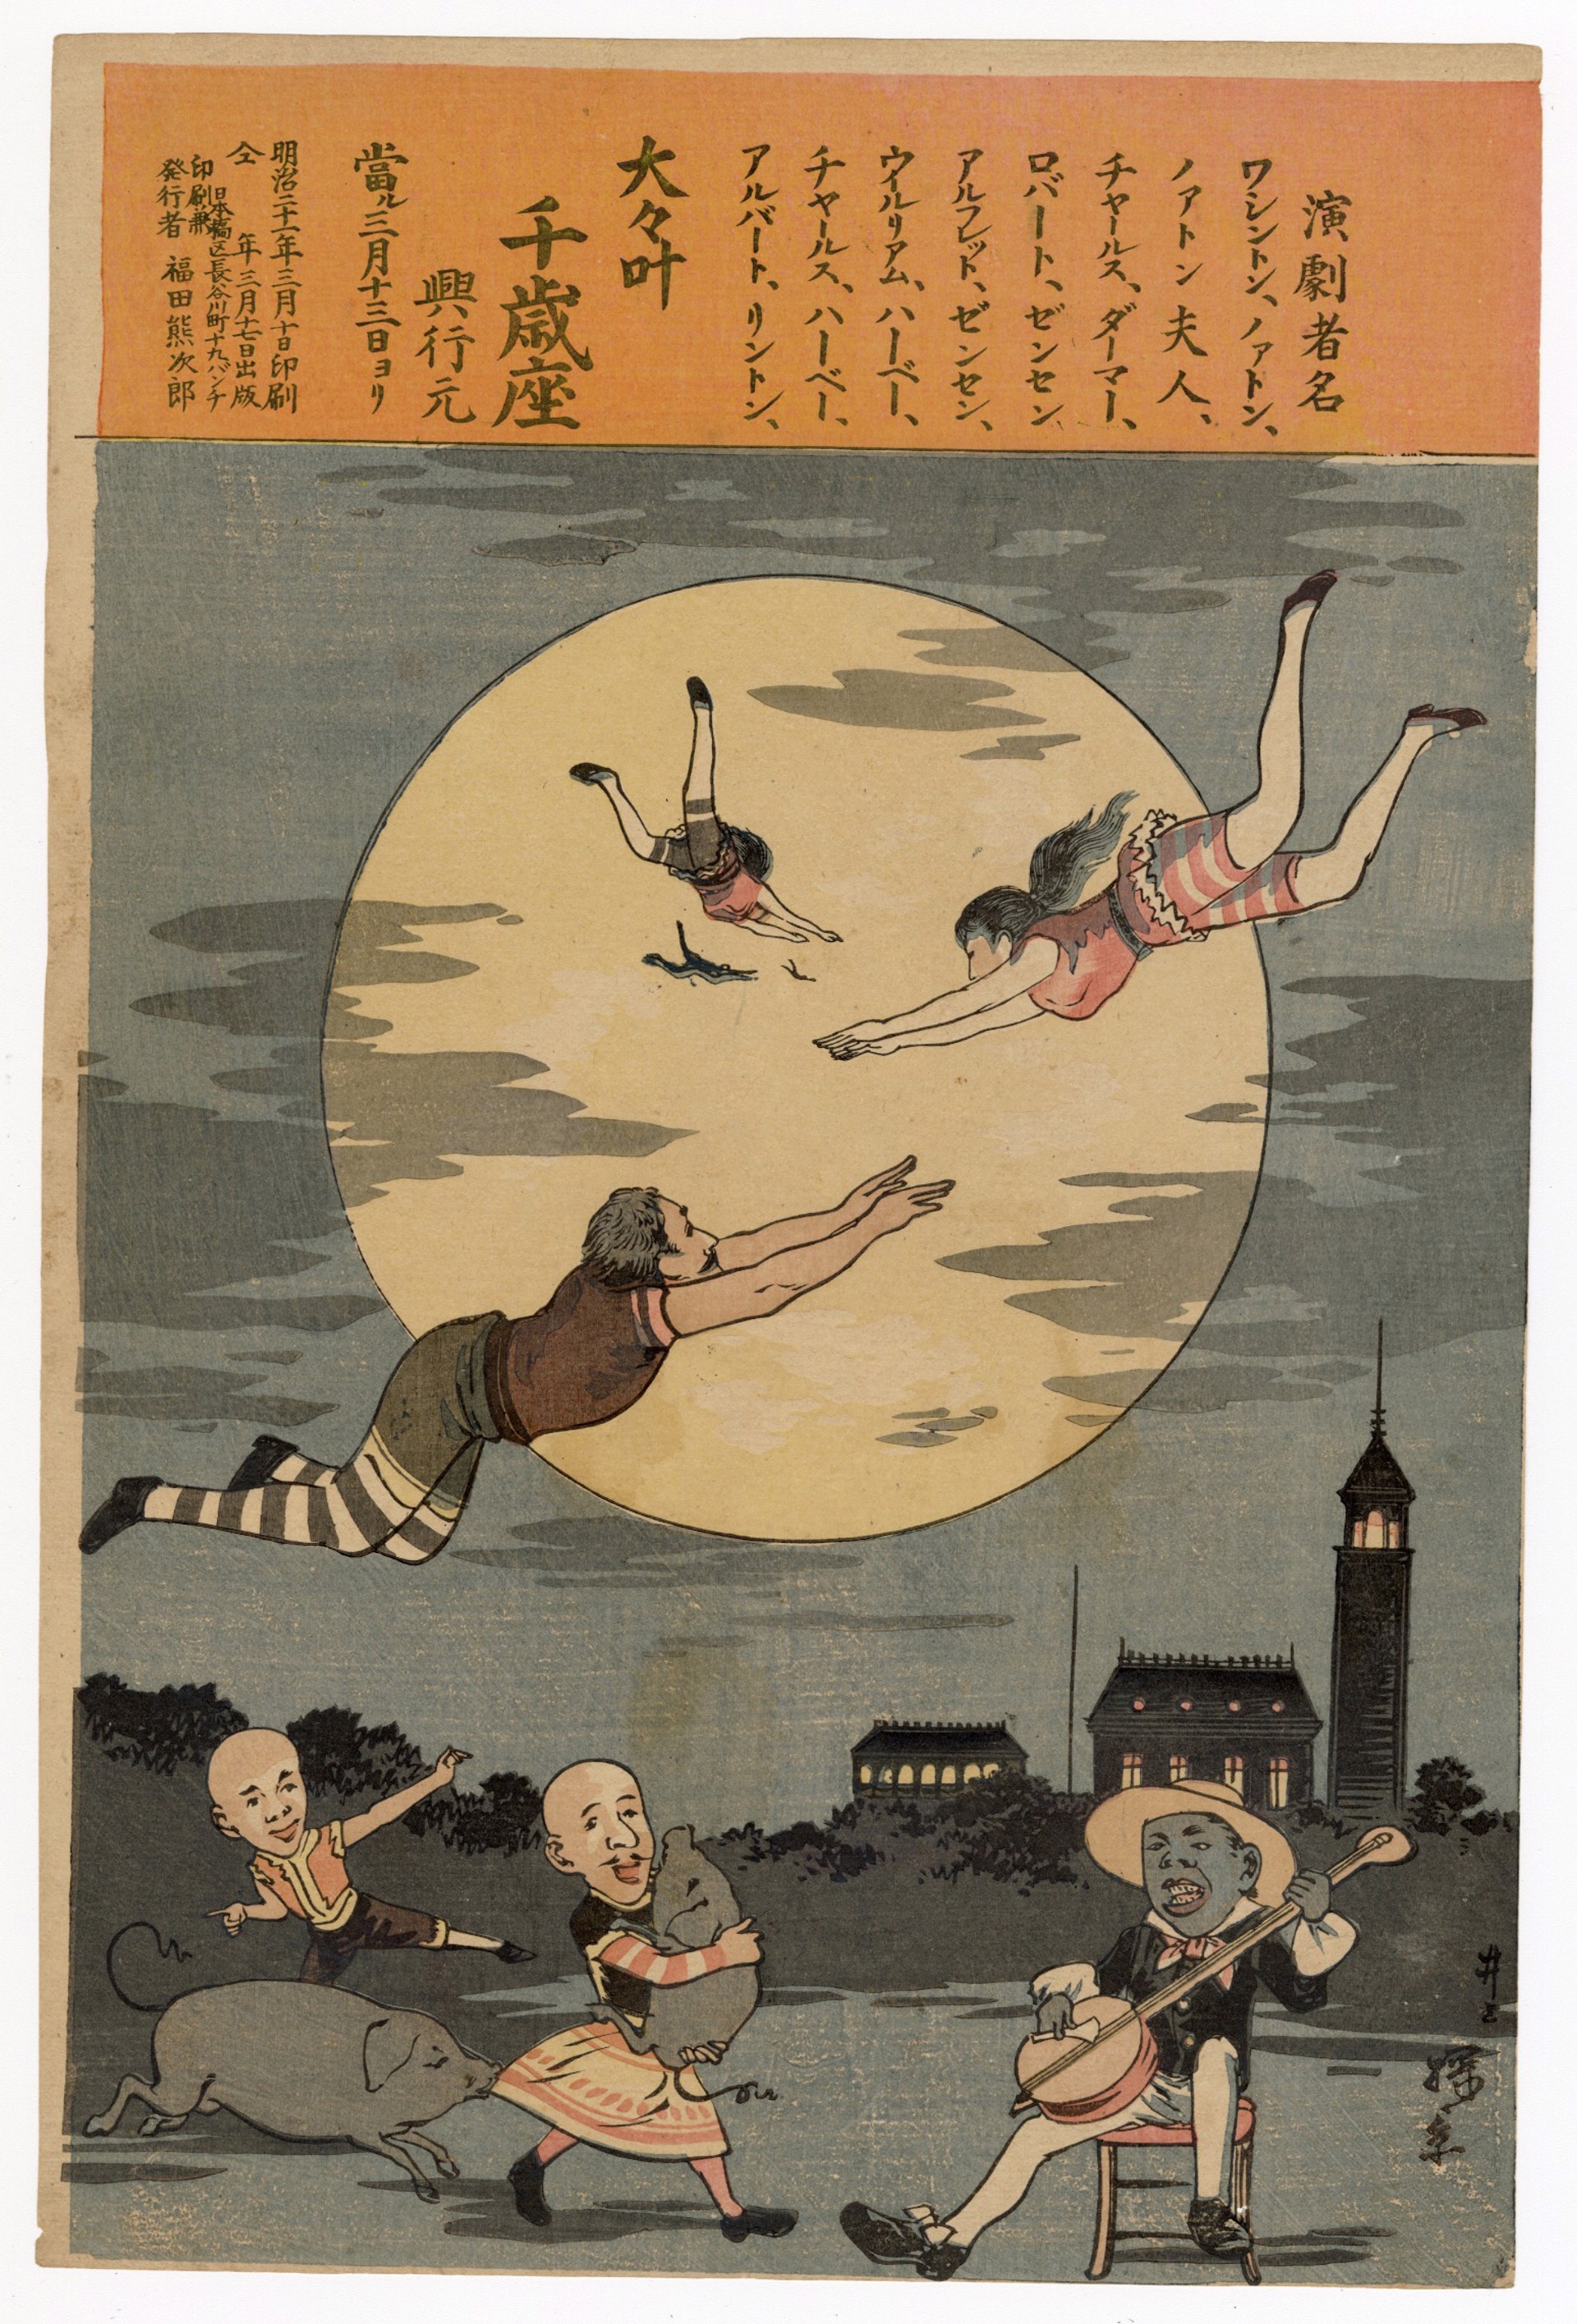 Advertisement for a Theater Revue at the Chitoseza Theater by Tankei (Inoue Yasuji)